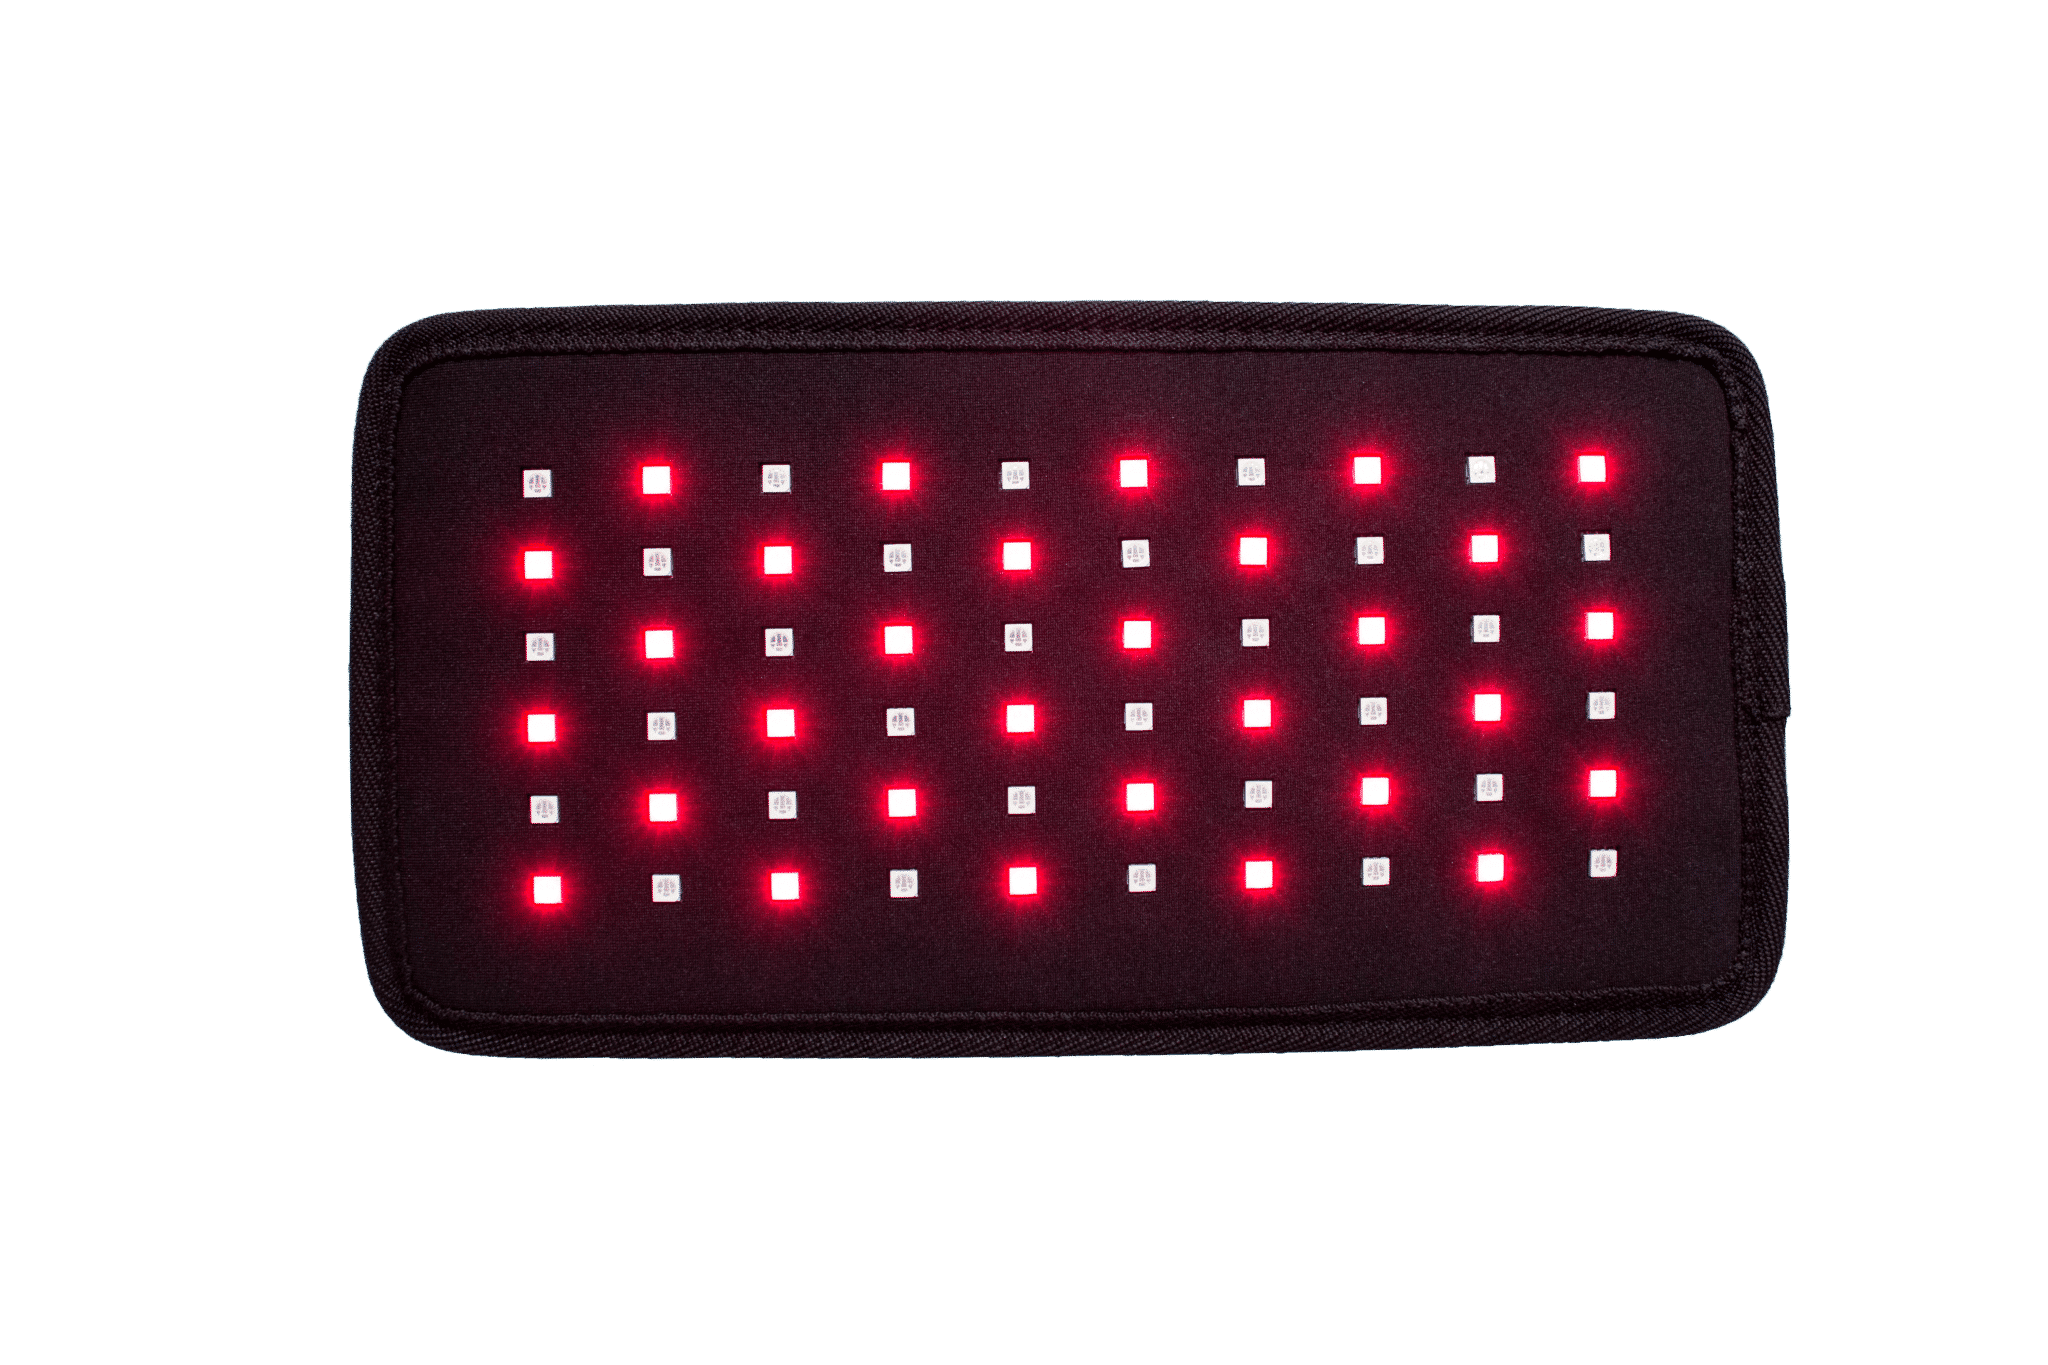 Dpl Neck Pillow Red Light Therapy For Neck Pain